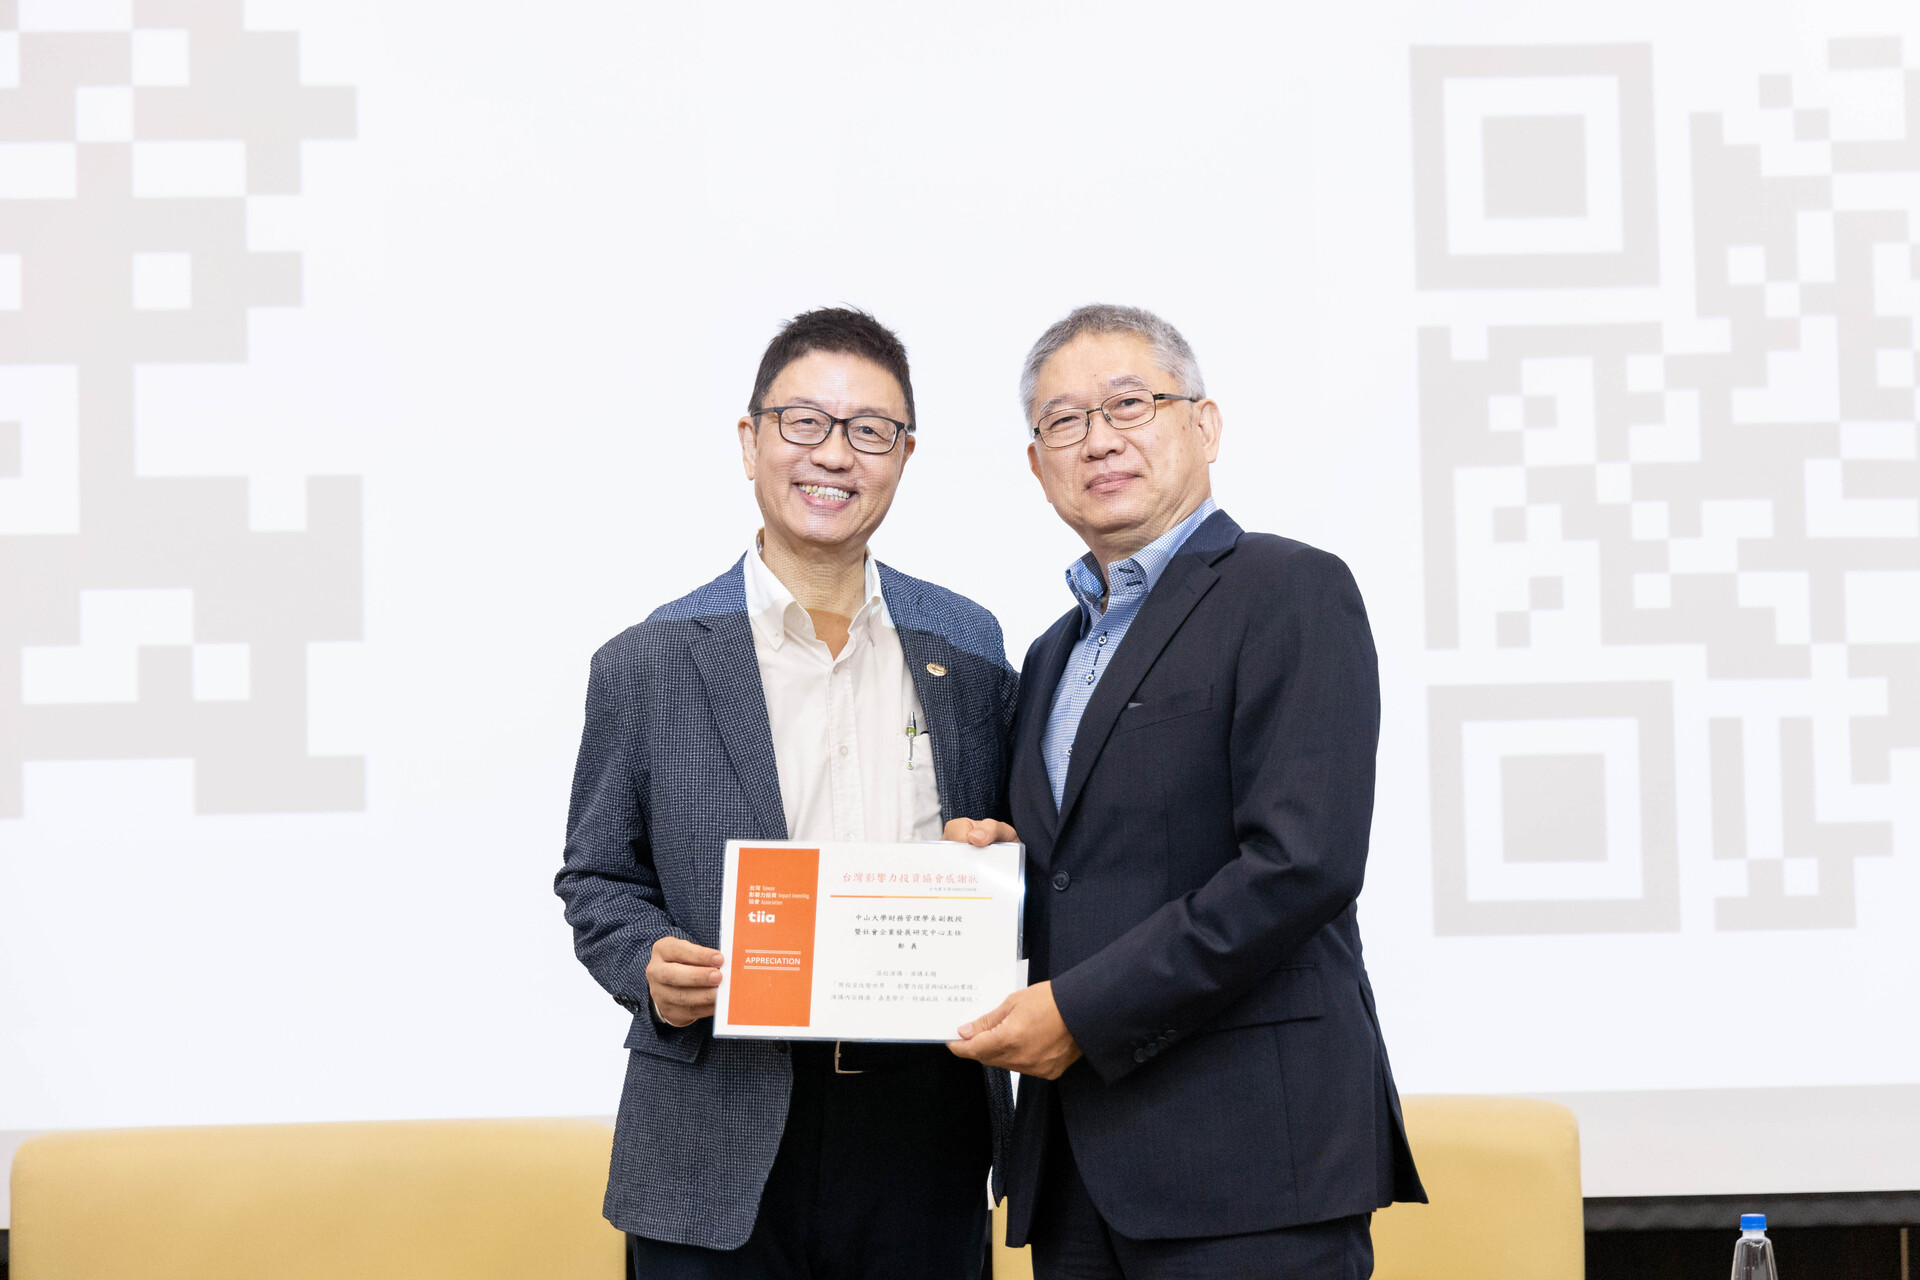 CEO of Taiwan Impact Investing Association Tao-kuei Wu awards a certificate of appreciation and presents a book to Jui-Kun Kuo, Associate Dean of the College of Management, NSYSU